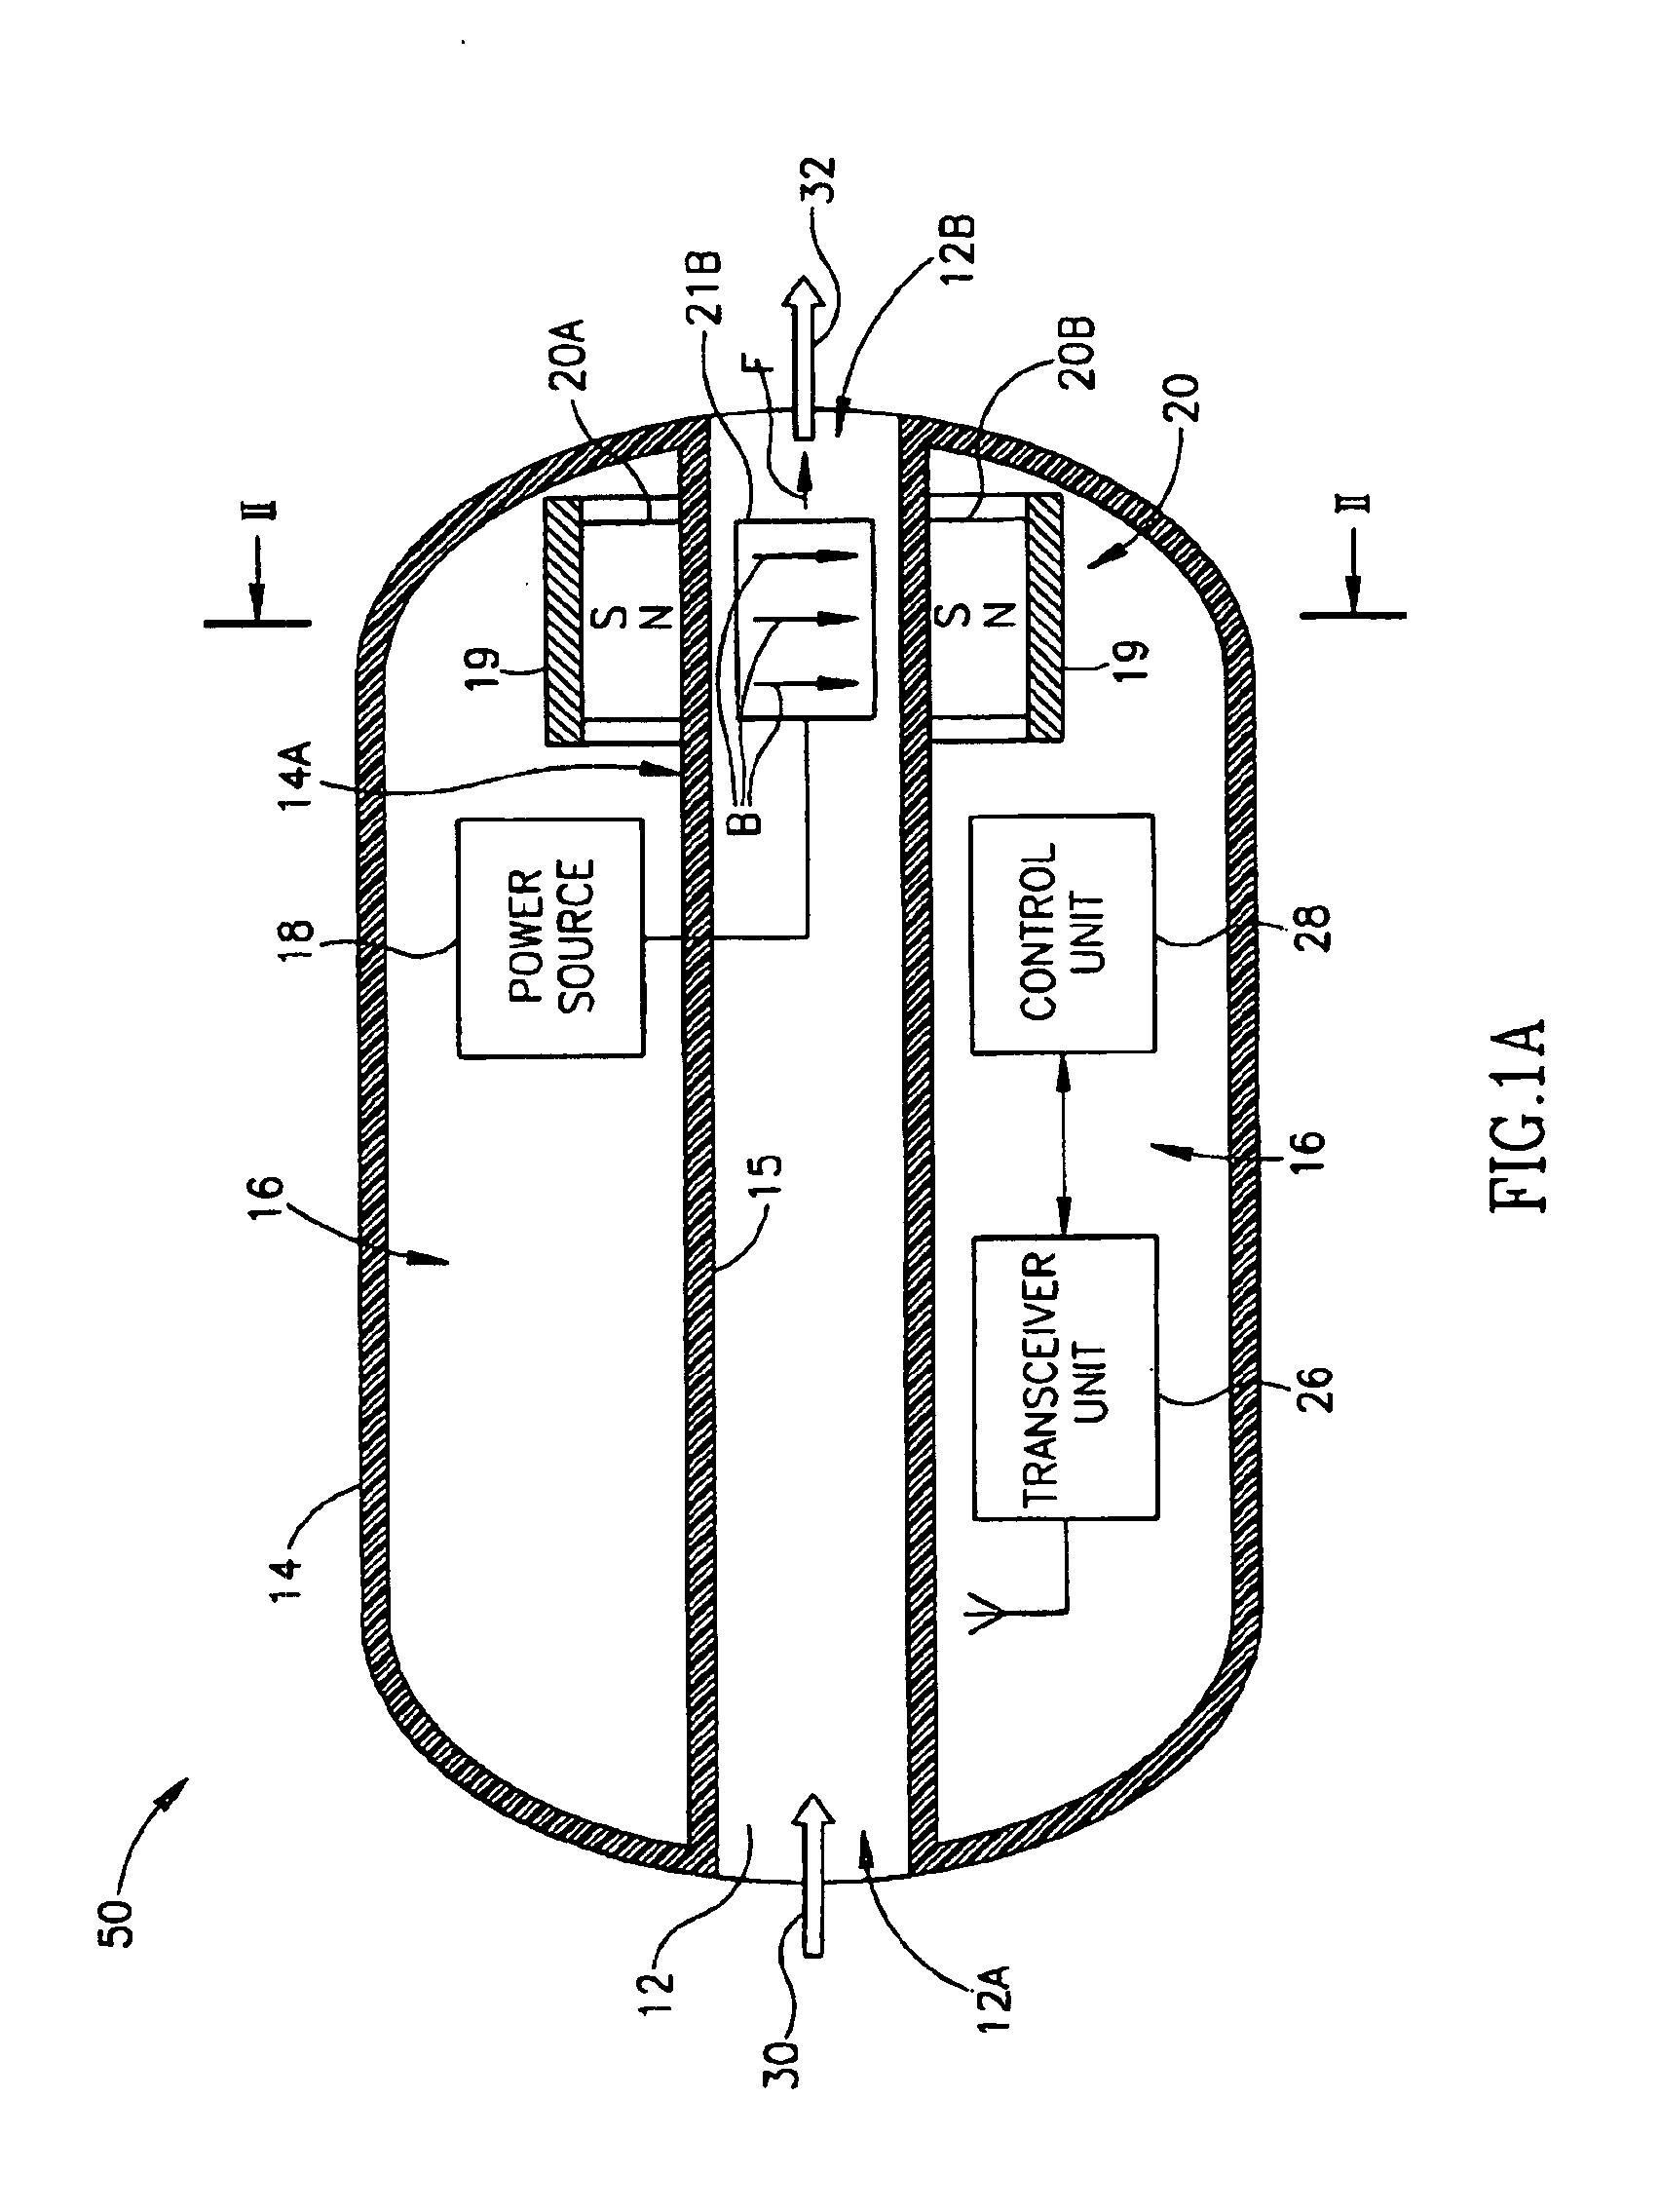 Self propelled device having a magnetohydrodynamic propulsion system